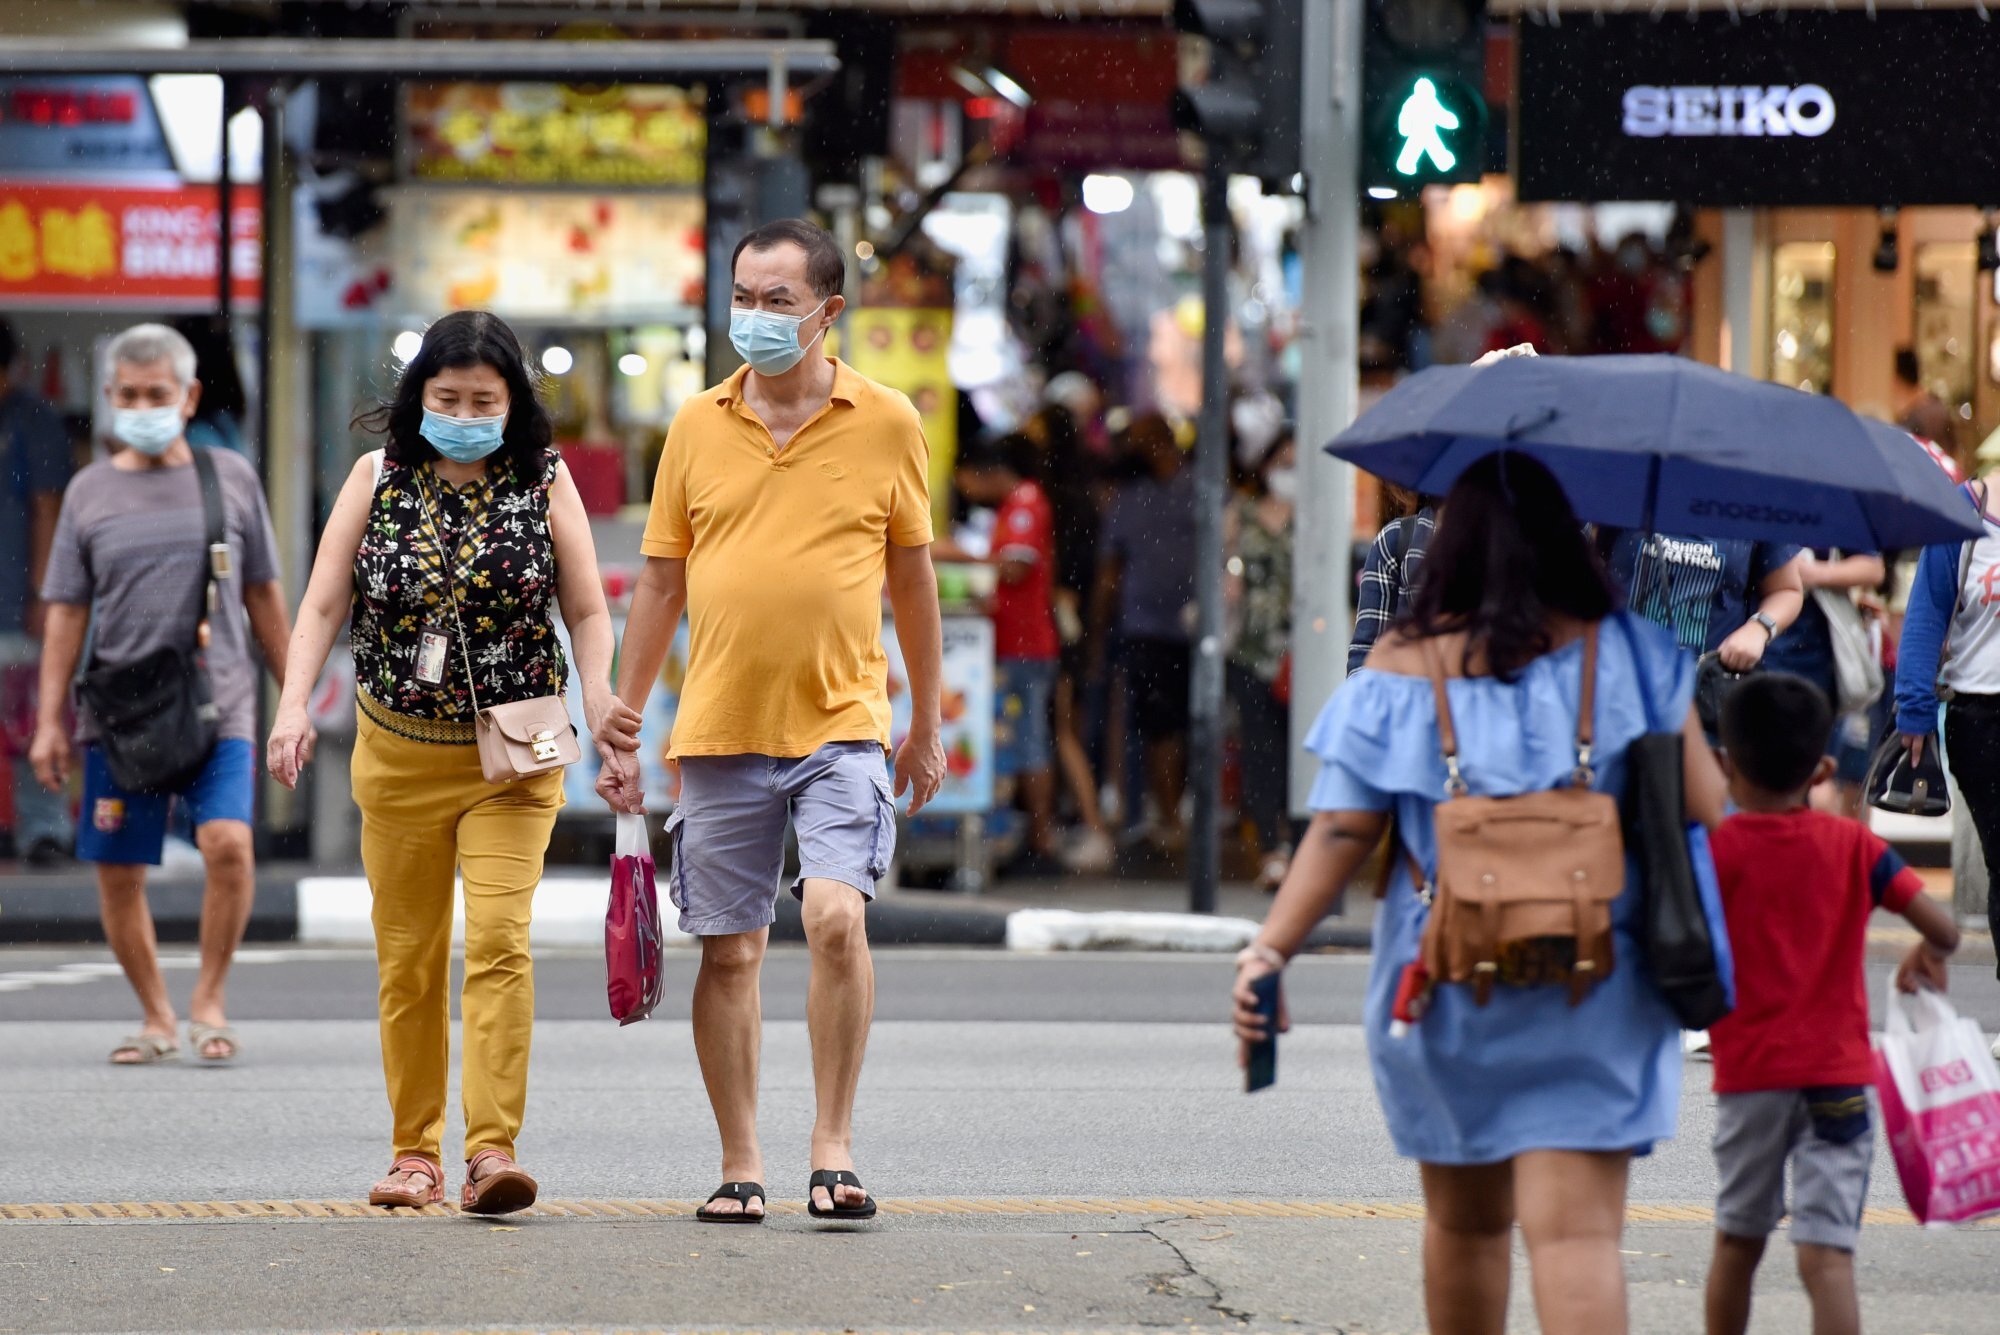 People cross a road during the coronavirus pandemic in Singapore in November 2021. Photo: Reuters